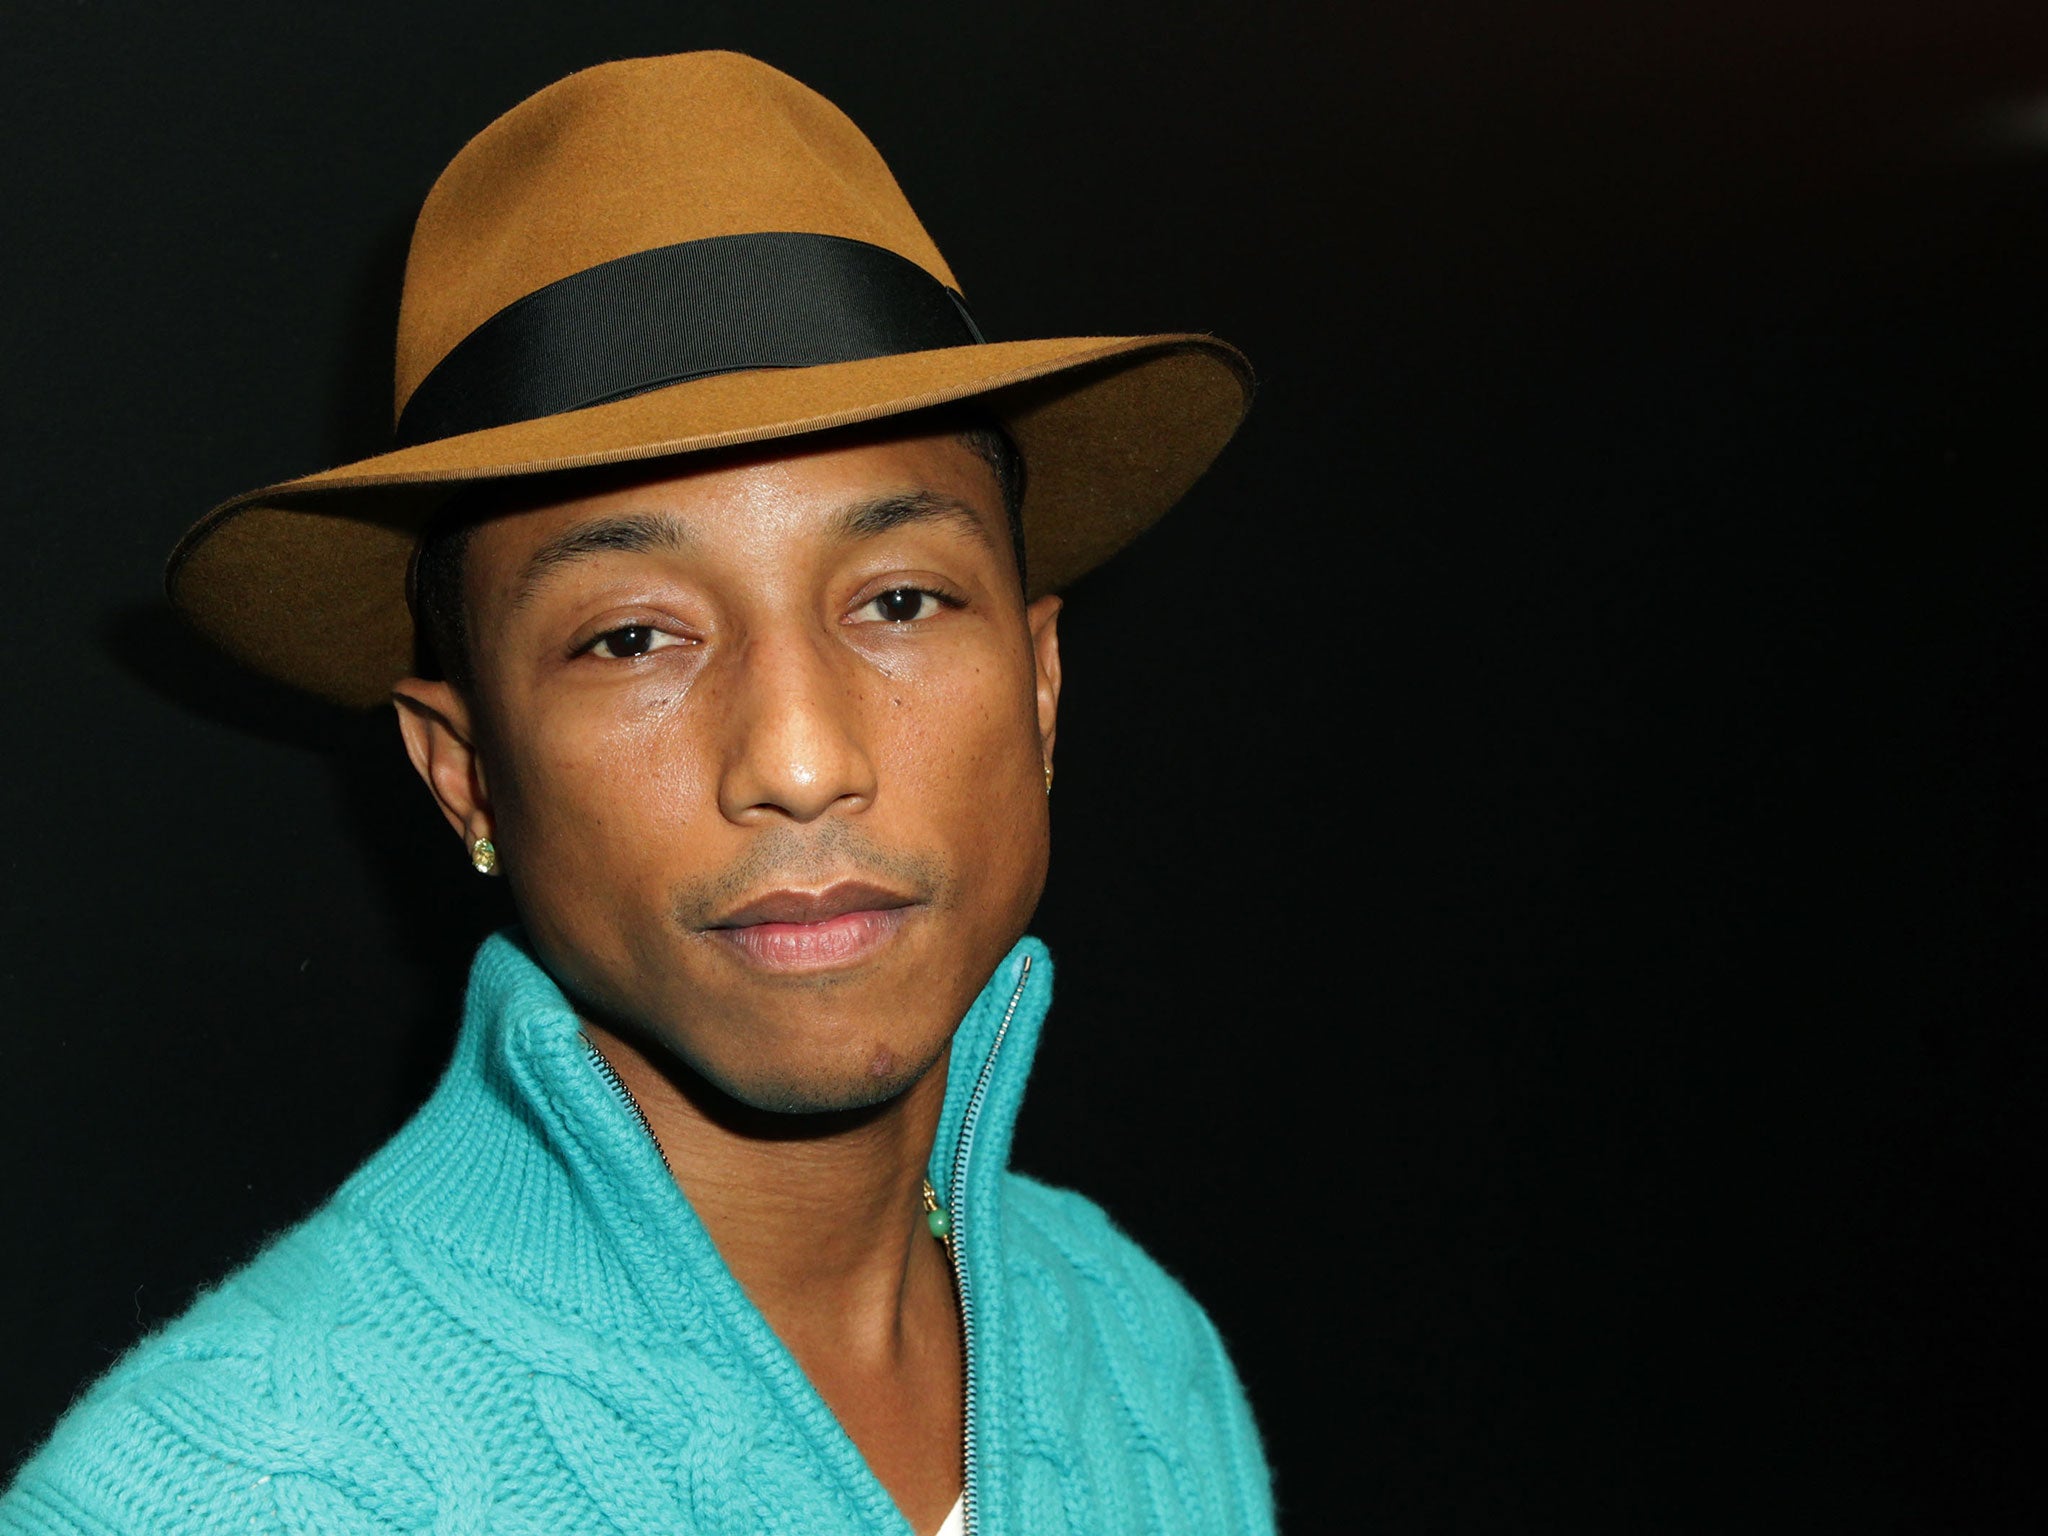 Pharrell dismissed the controversy surrounding "Blurred Lines"